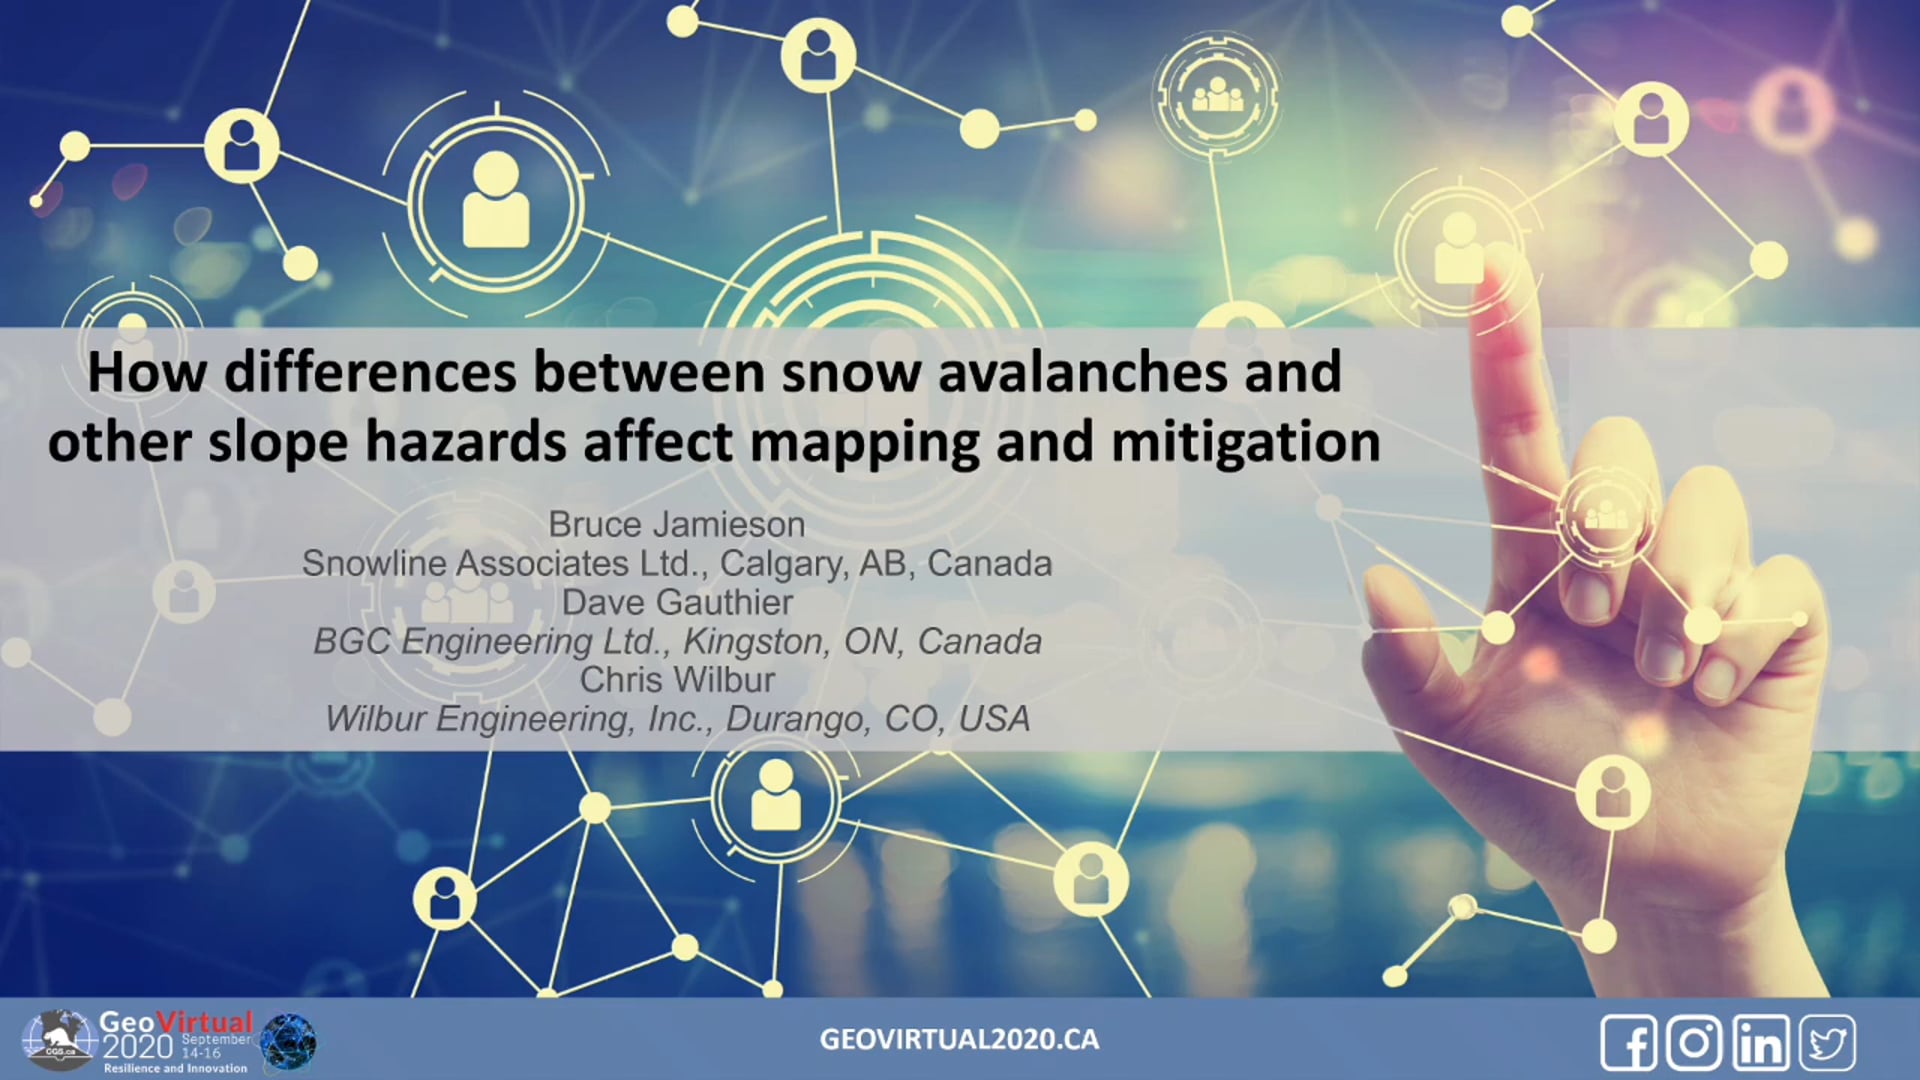 How differences between snow avalanches and other slope hazards affect mapping and mitigation